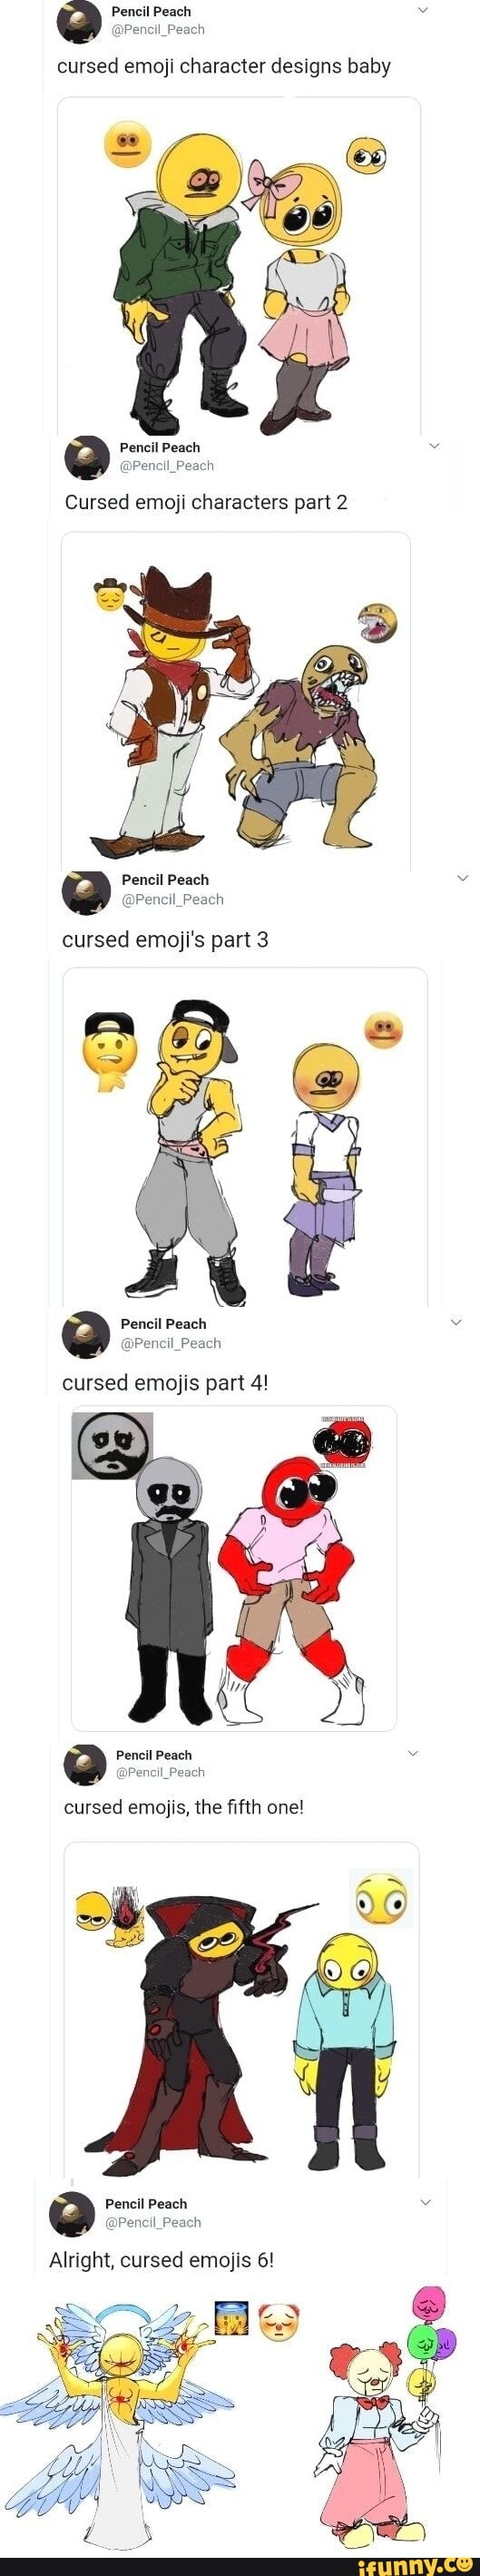 Cursedemoji memes. Best Collection of funny Cursedemoji pictures on iFunny